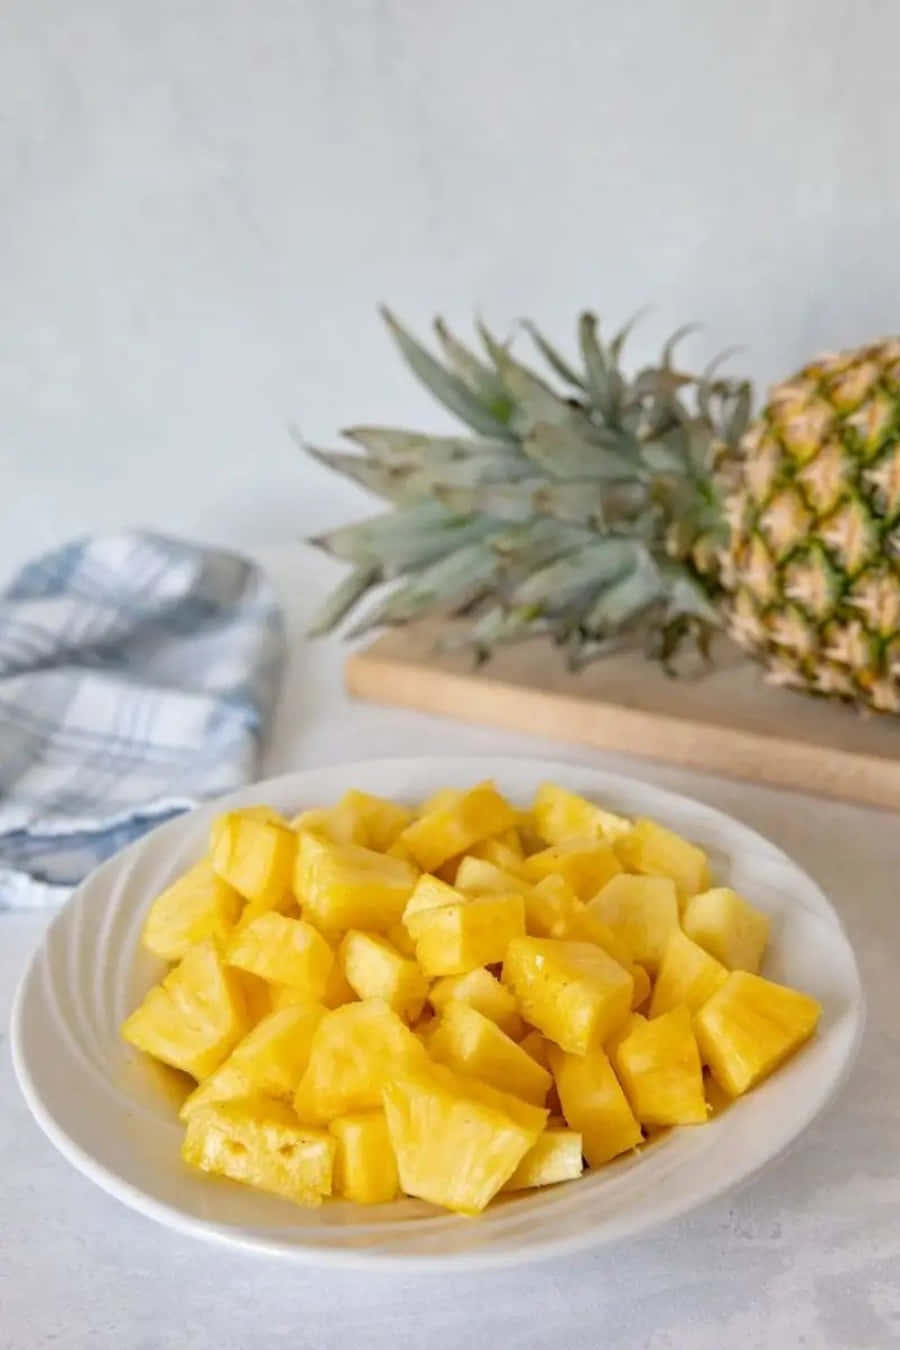 Enjoy a Delicious Slice of Pineapple